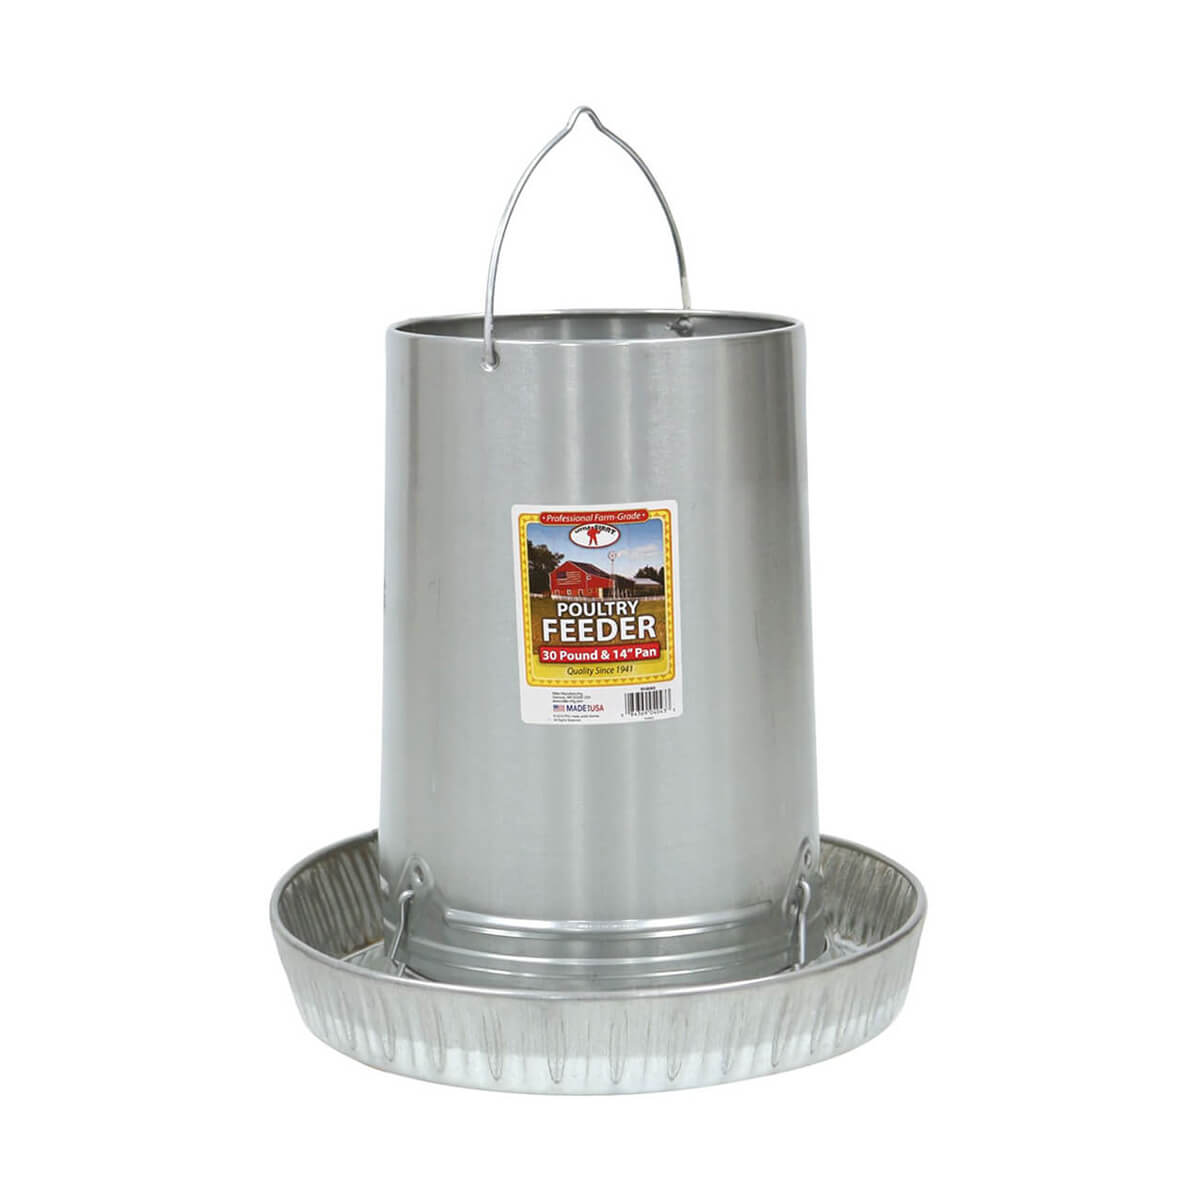 Hanging Poultry Feeders with Medium Pan - 30 lb Capacity